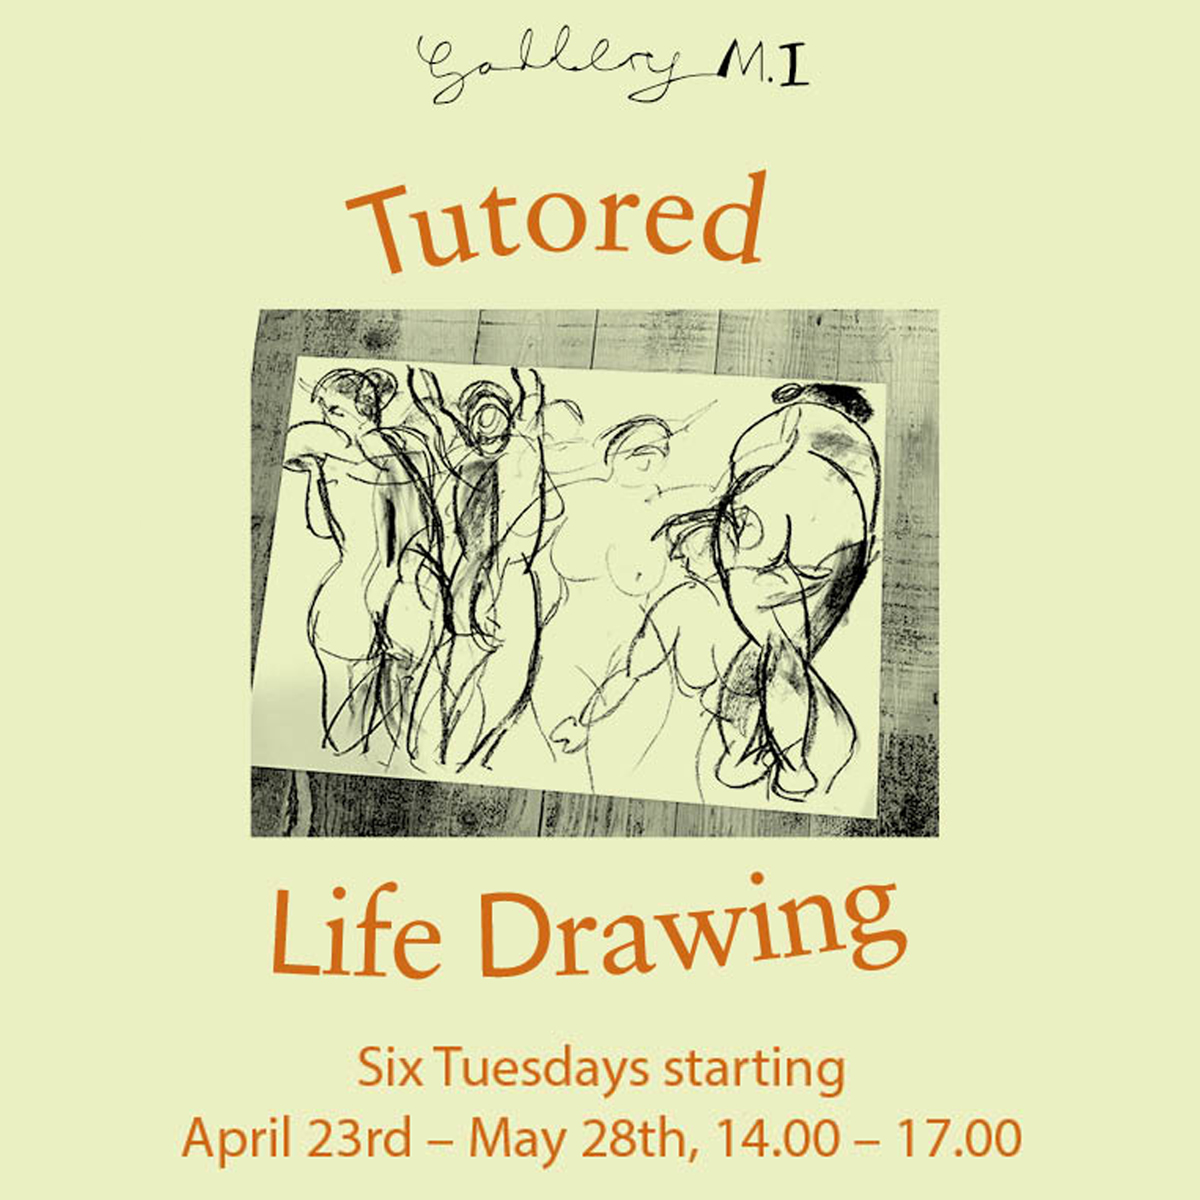 Join this 6 Week Tutored Life Drawing Course at Gallery M.I in Wirksworth. This course will be starting on Tuesday April 23rd at 2pm - 5pm for 6 weeks. artsderbyshire.org.uk/whats-on/works… #lifedrawing #derbyshireartists #artworkshop #wirksworth #derbyshirearts